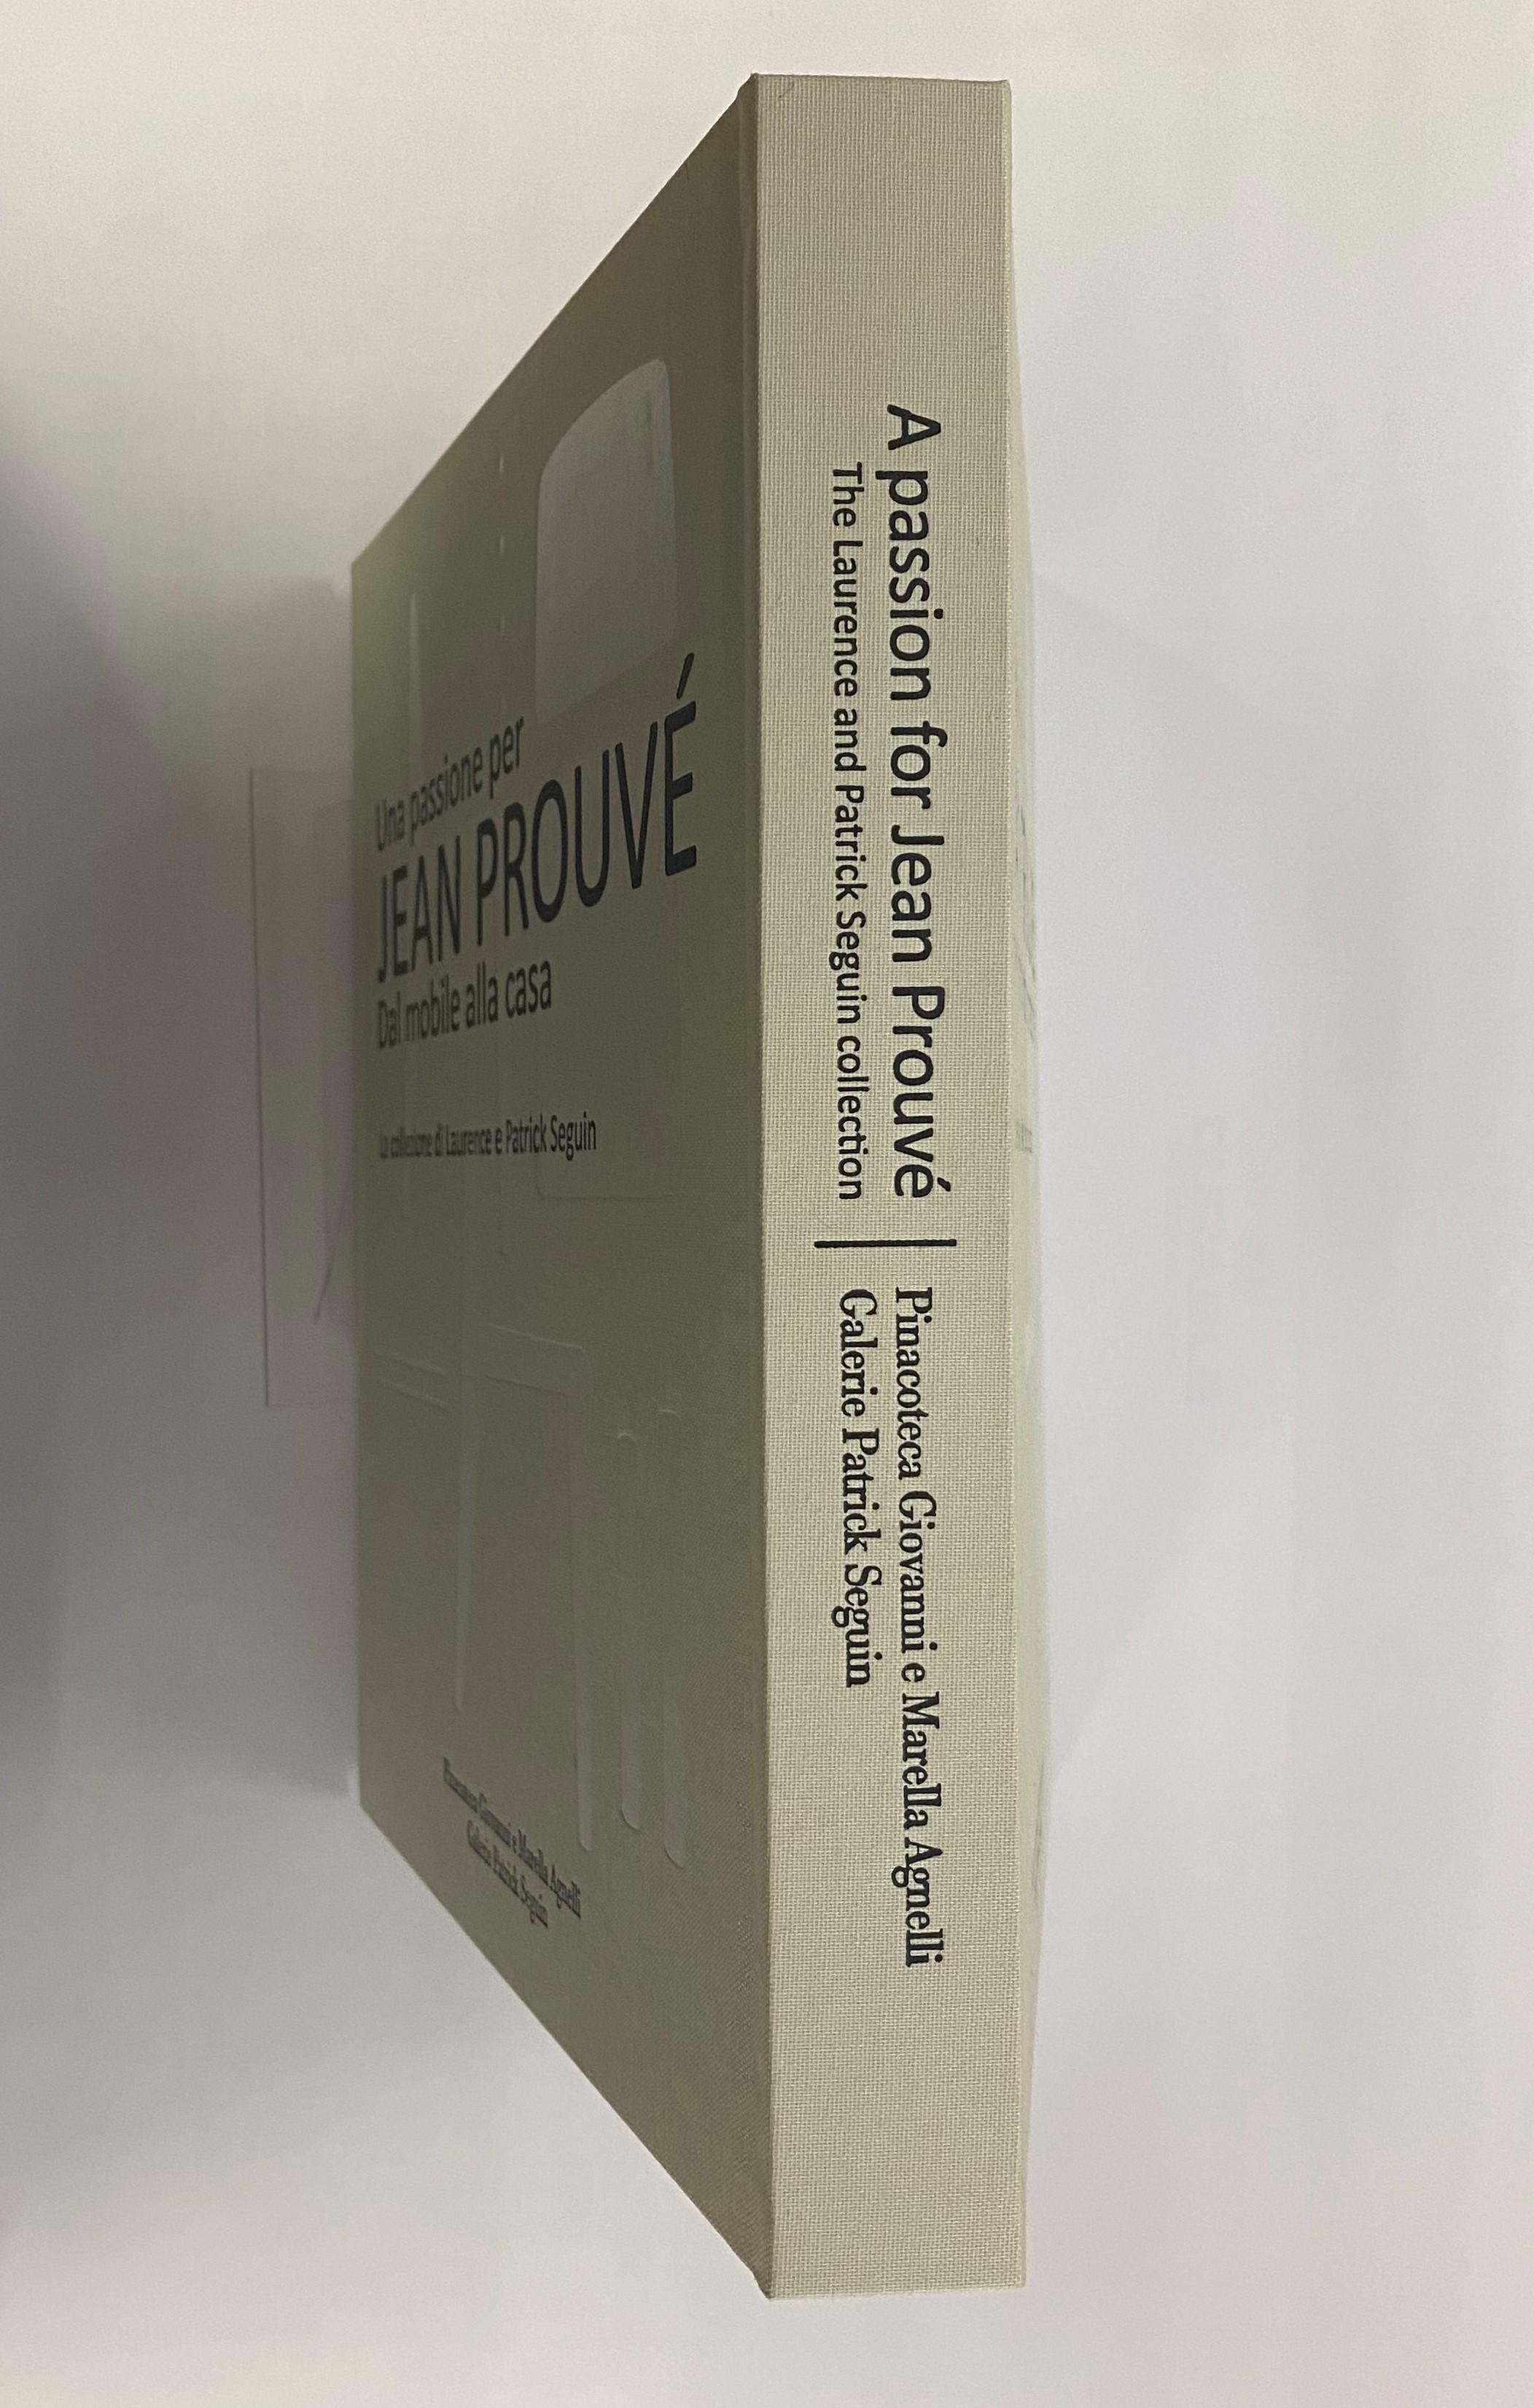 A Passion For Jean Prouve: From Furniture to Architecture (Book) For Sale 11